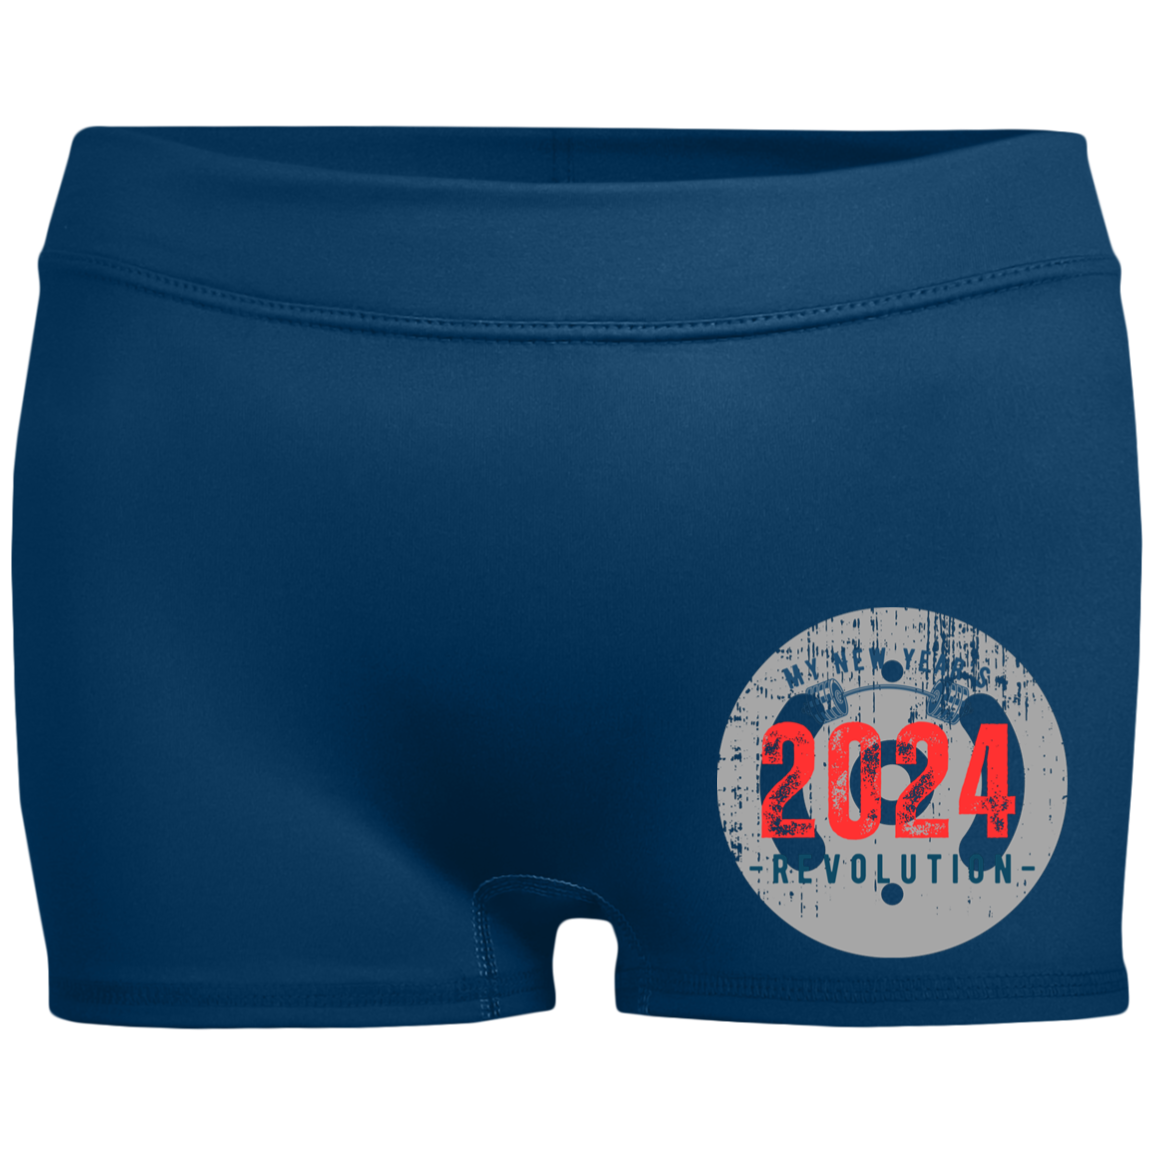 2024 New Year's Revolution Ladies' Fitted Moisture-Wicking 2.5 inch Inseam Shorts